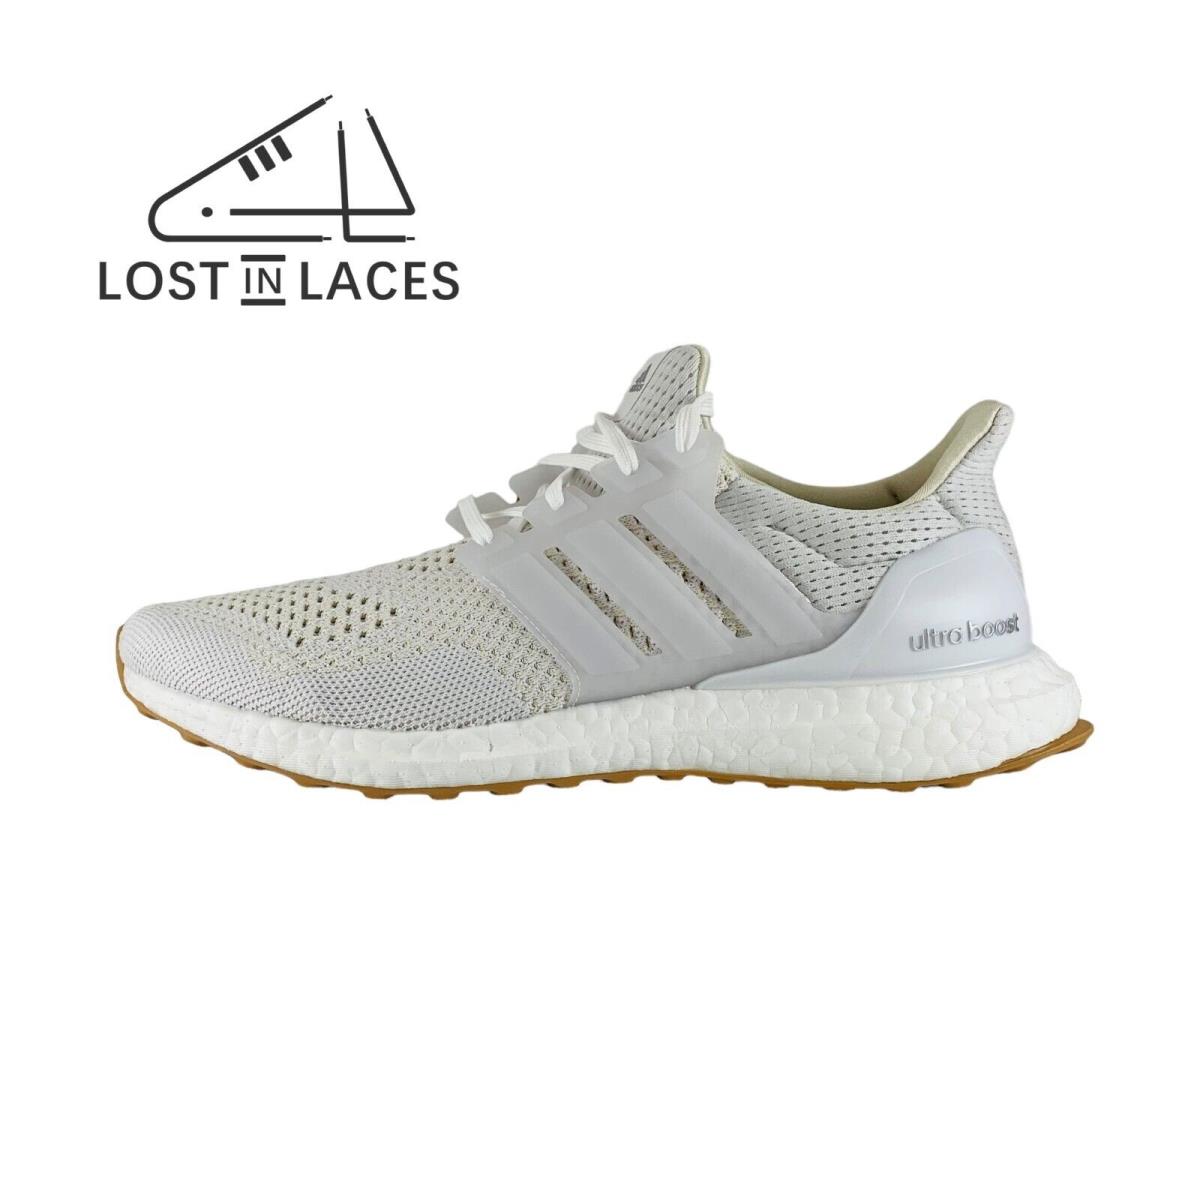 Adidas Ultraboost 1.0 White Gum Sneakers Running Shoes ID9689 Womens Sizes